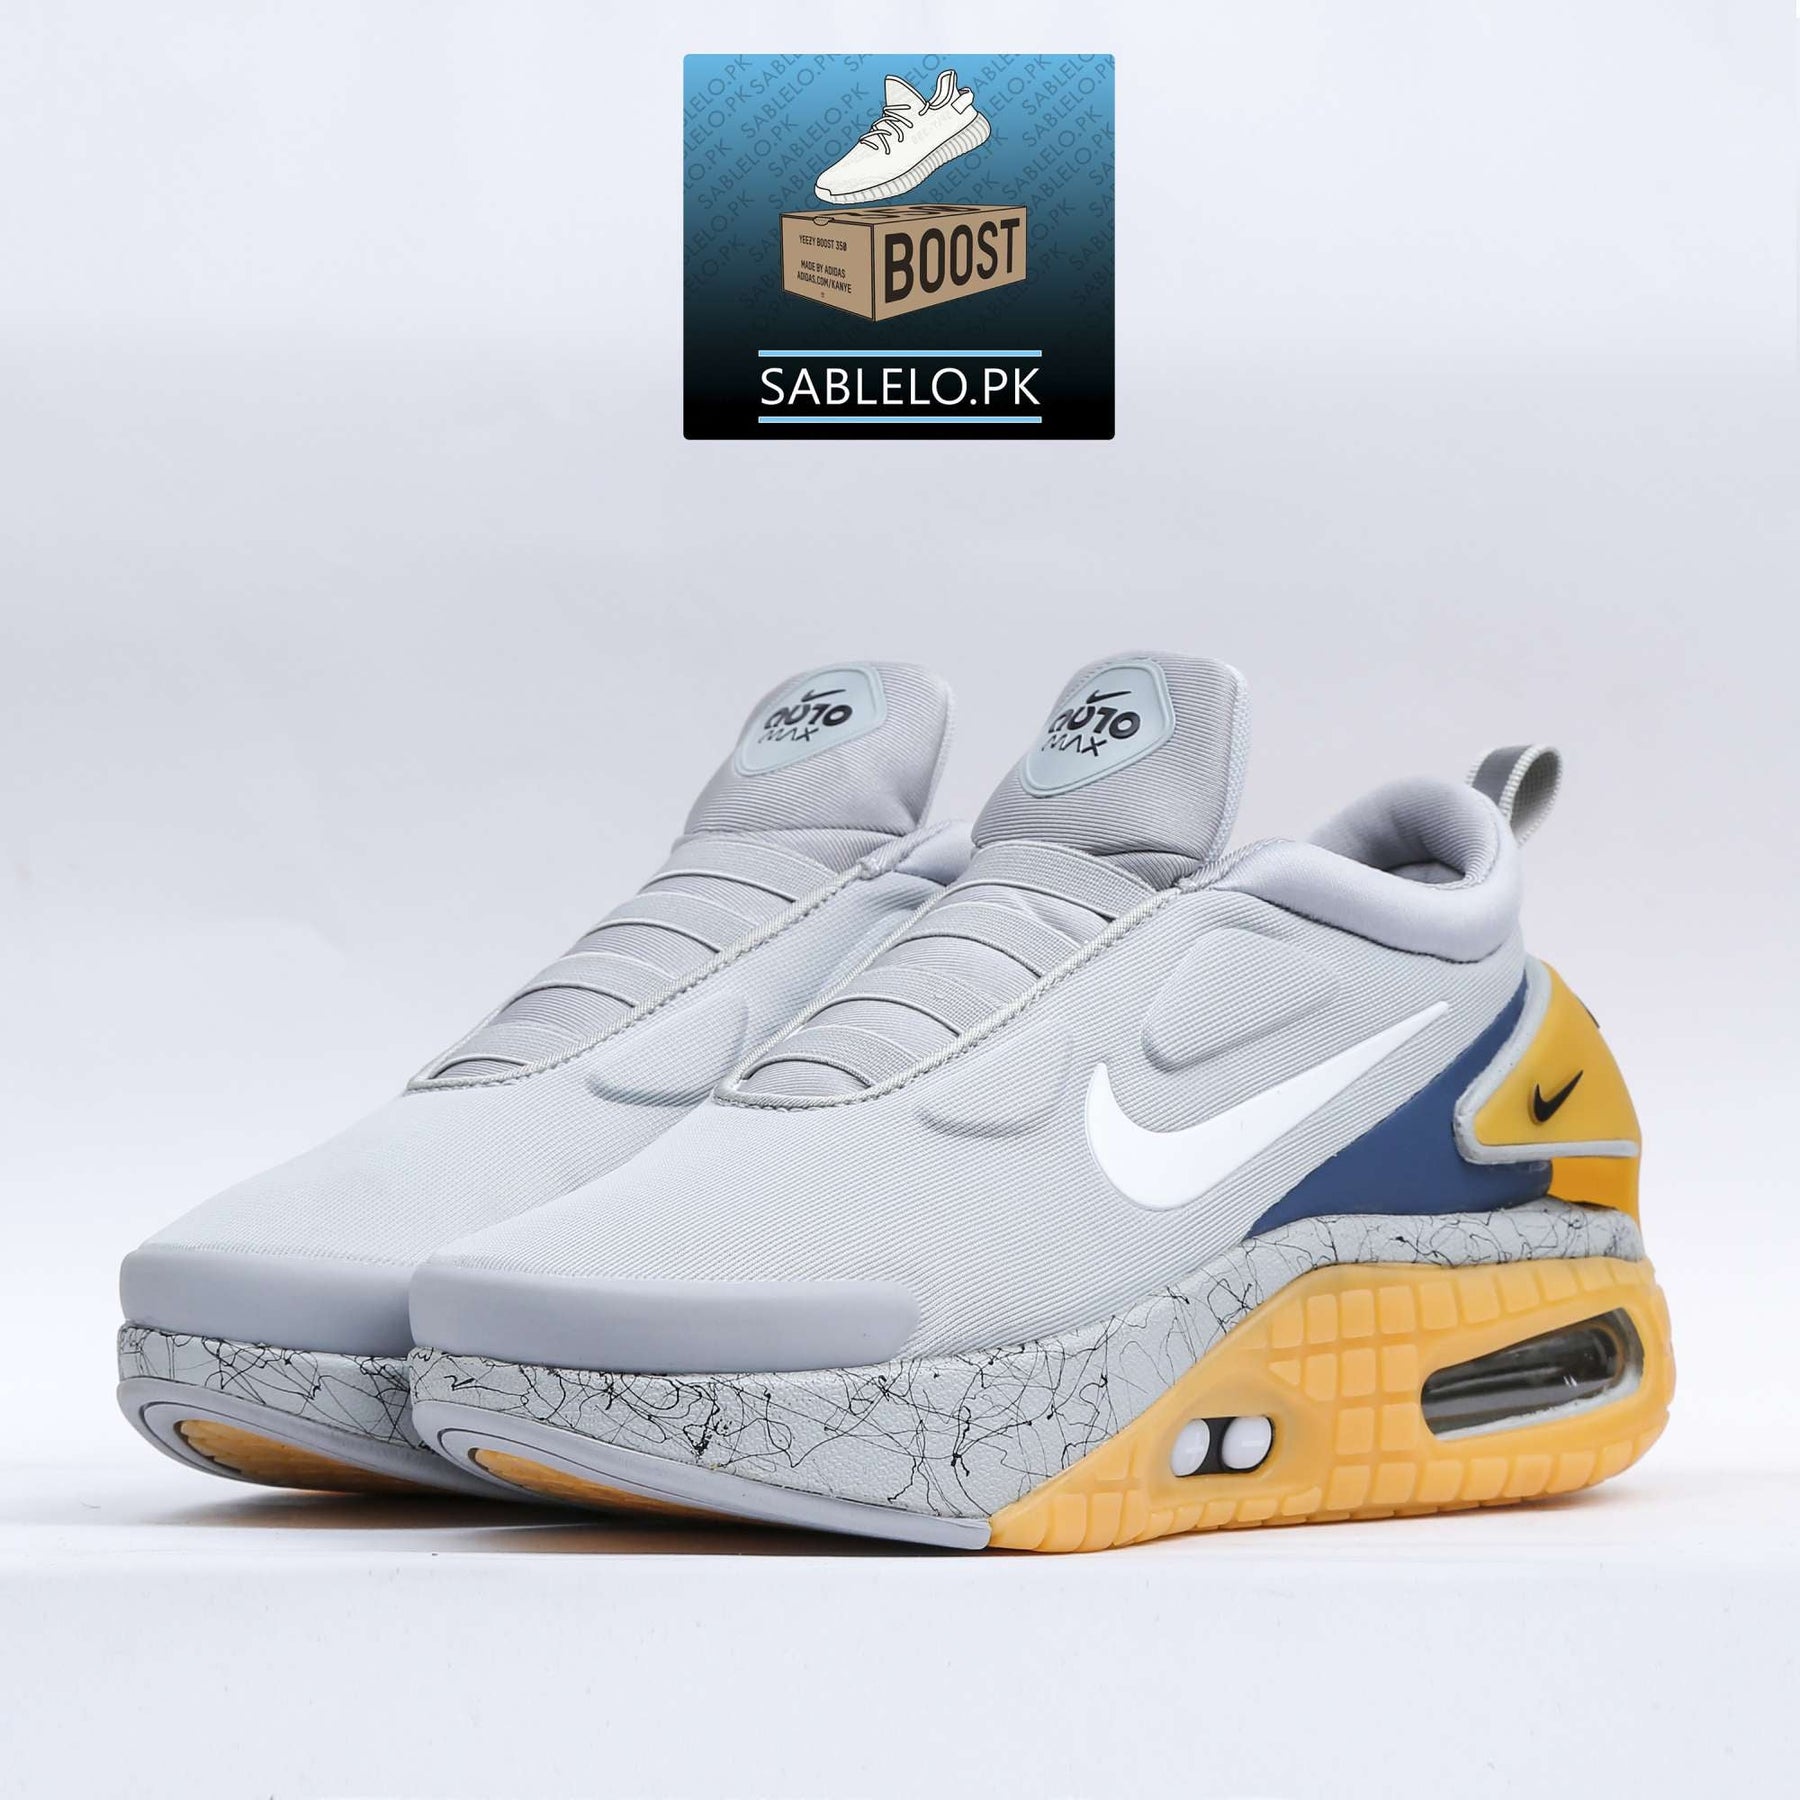 Nike Adobt Auto Max Juana - Premium Shoes from perfectshop - Just Rs.8999! Shop now at Sablelo.pk